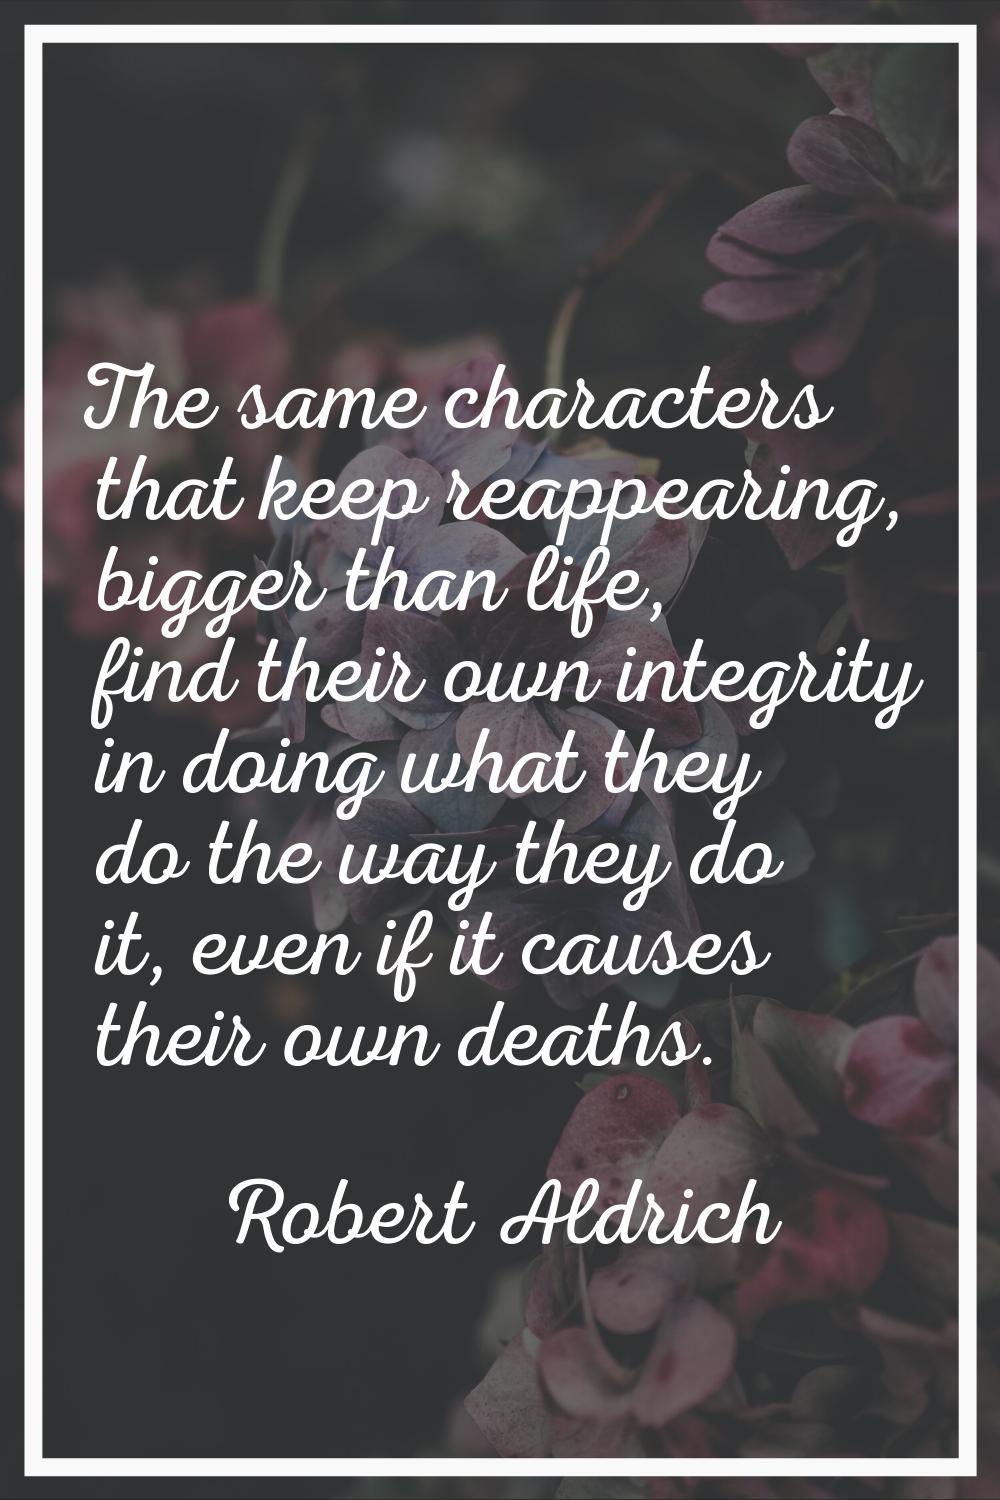 The same characters that keep reappearing, bigger than life, find their own integrity in doing what